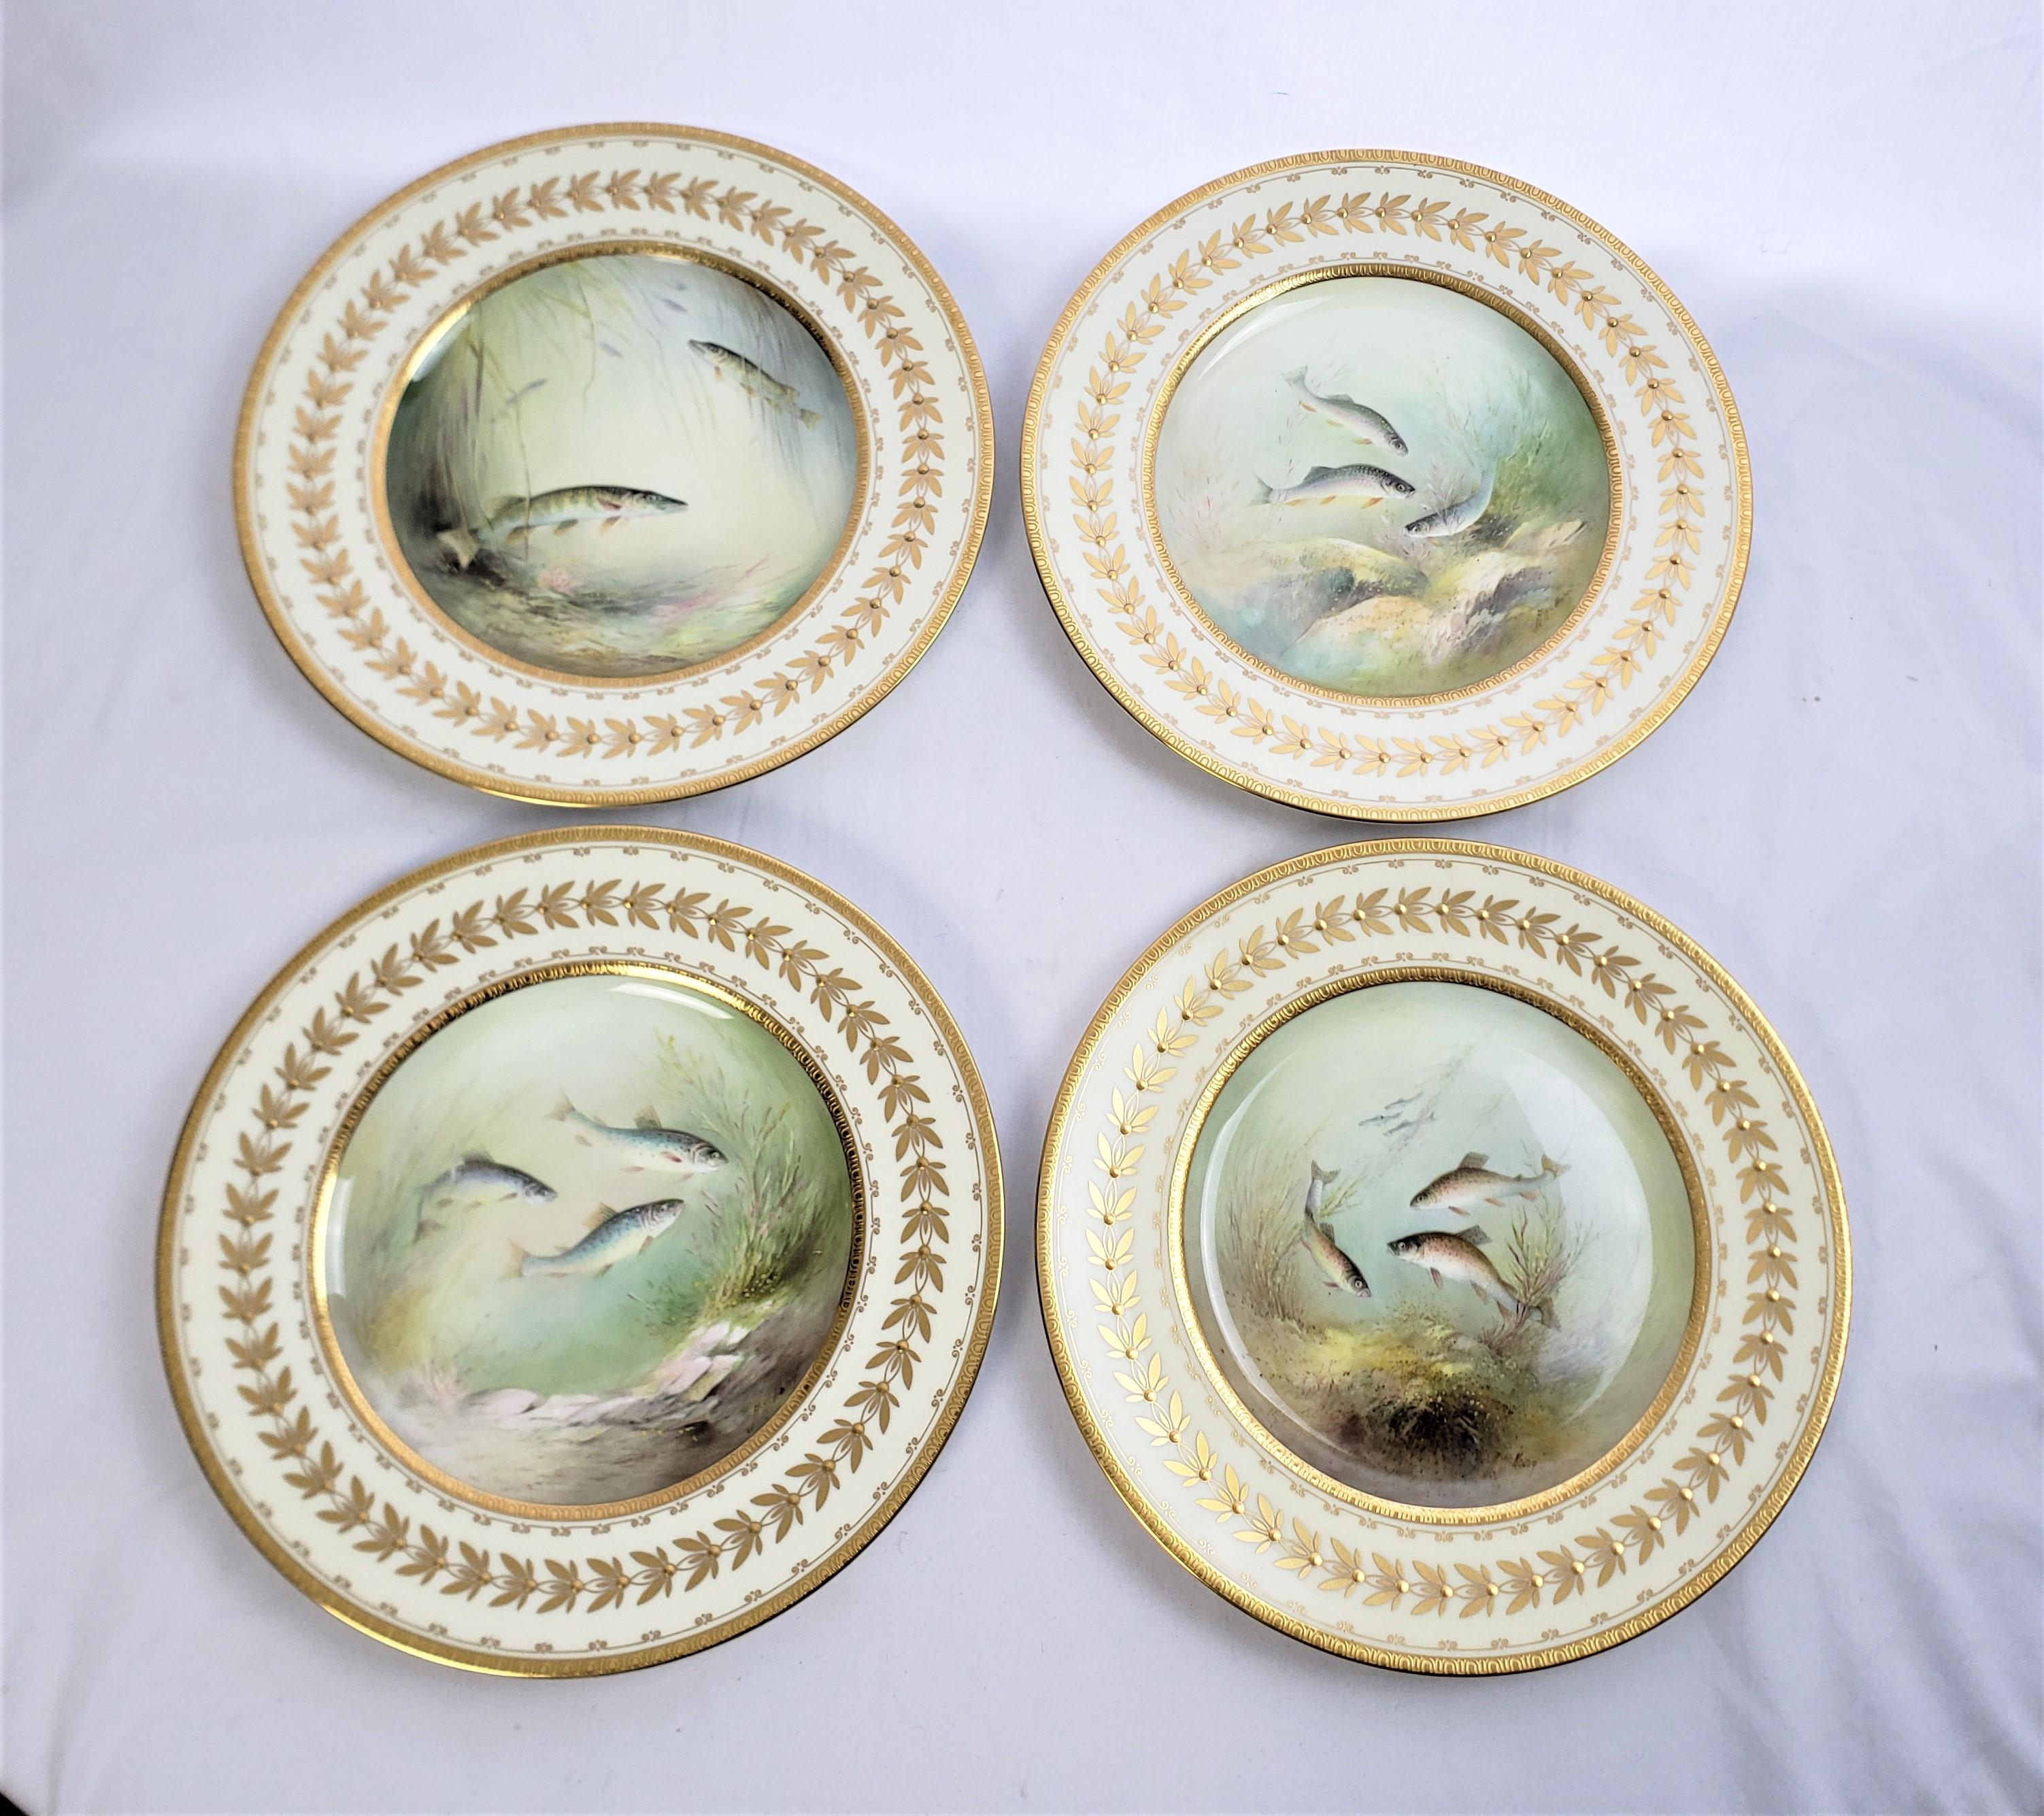 This set of cabinet plates were made by the renowned Minton factory of England in approximately 1900 for the Birks exclusive department store chain and done in a Victorian style. The plates are composed of bone china in a white ground with